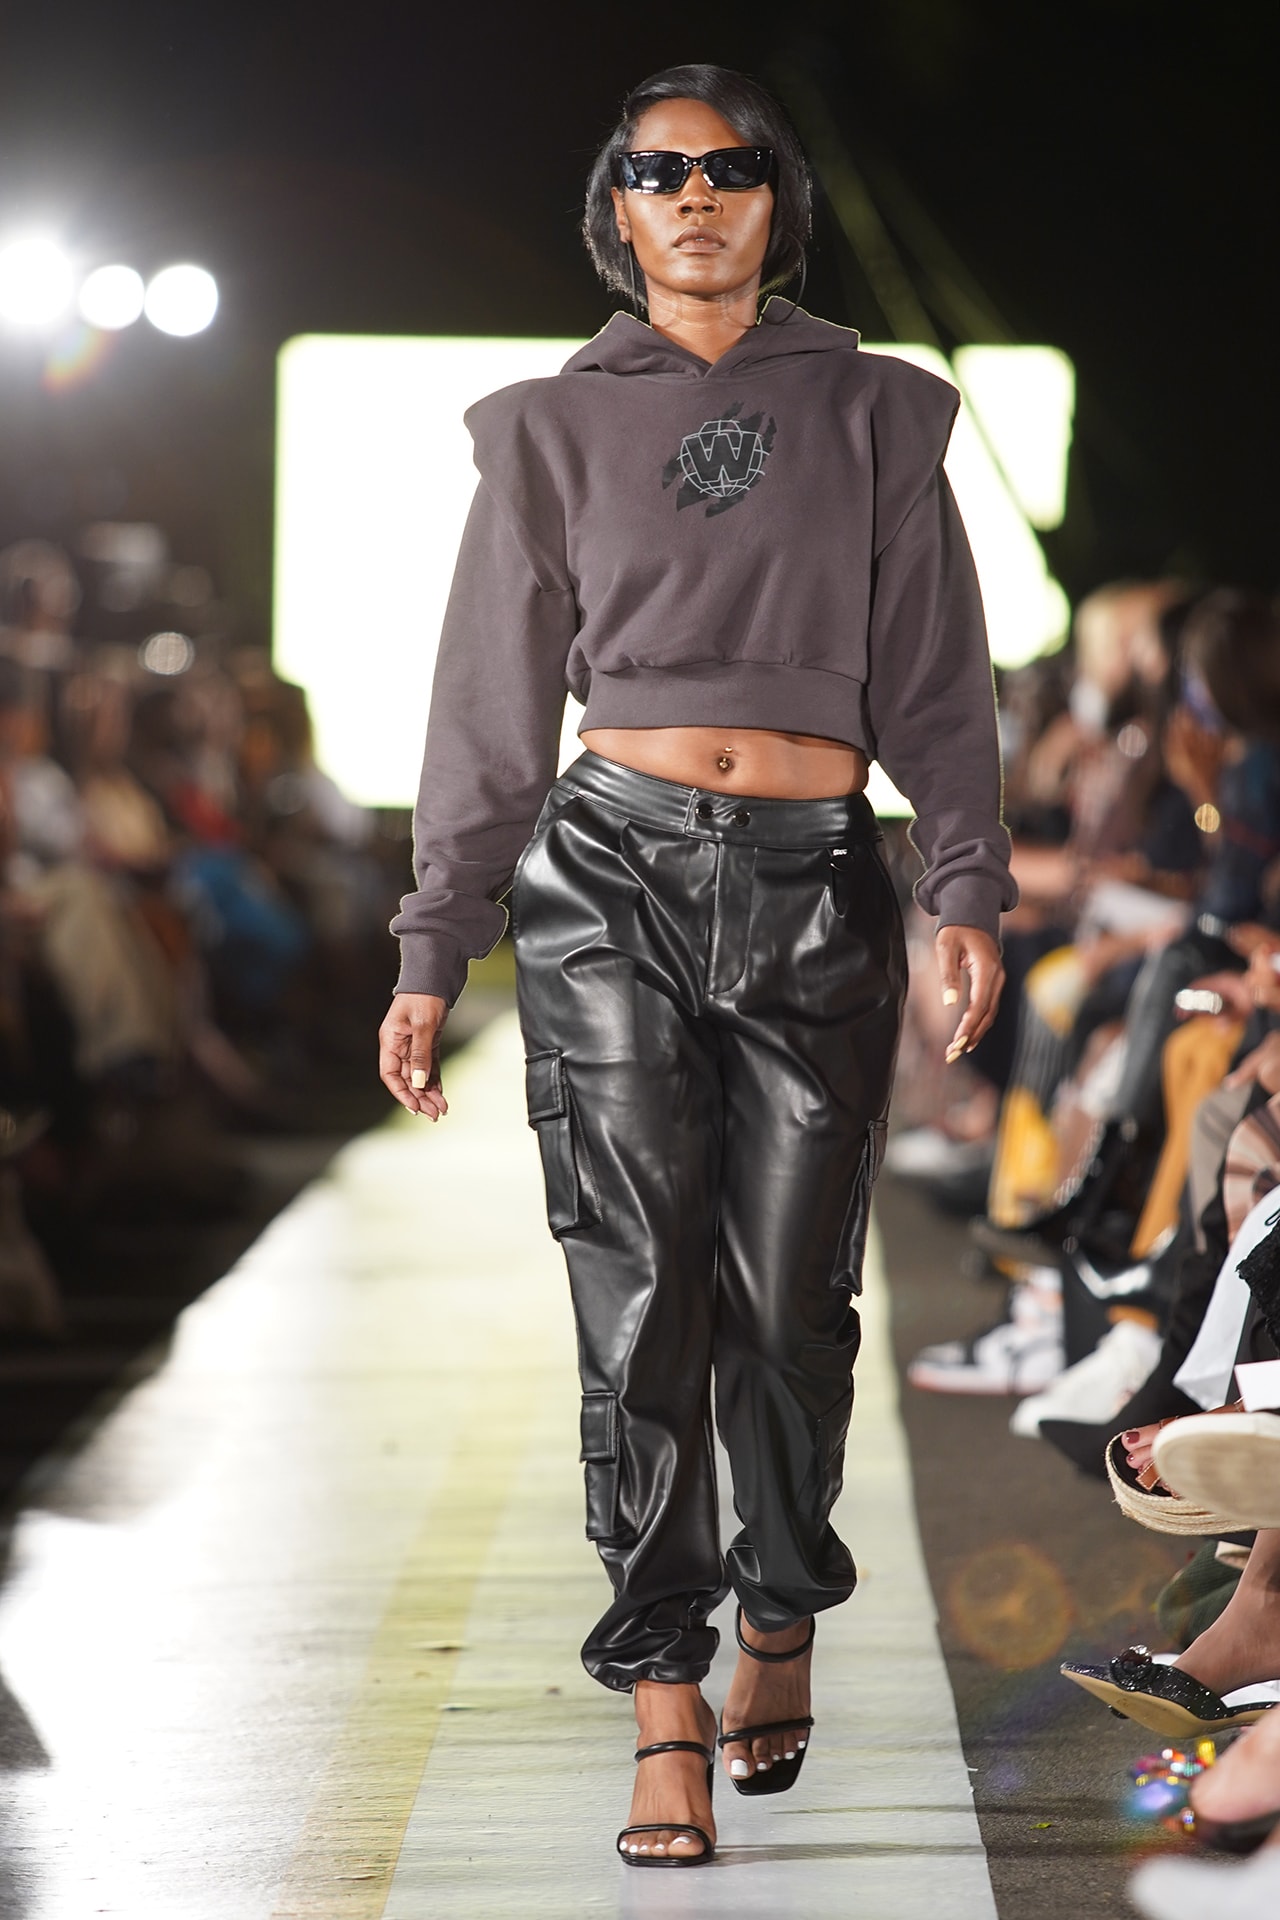 TIER Harlem's Fashion Row Runway Show New York NYFW Nigeria Ealey Victor James Esaīe Jean Simon Black Owned Brand Brooklyn Graphic Cropped Top Pants